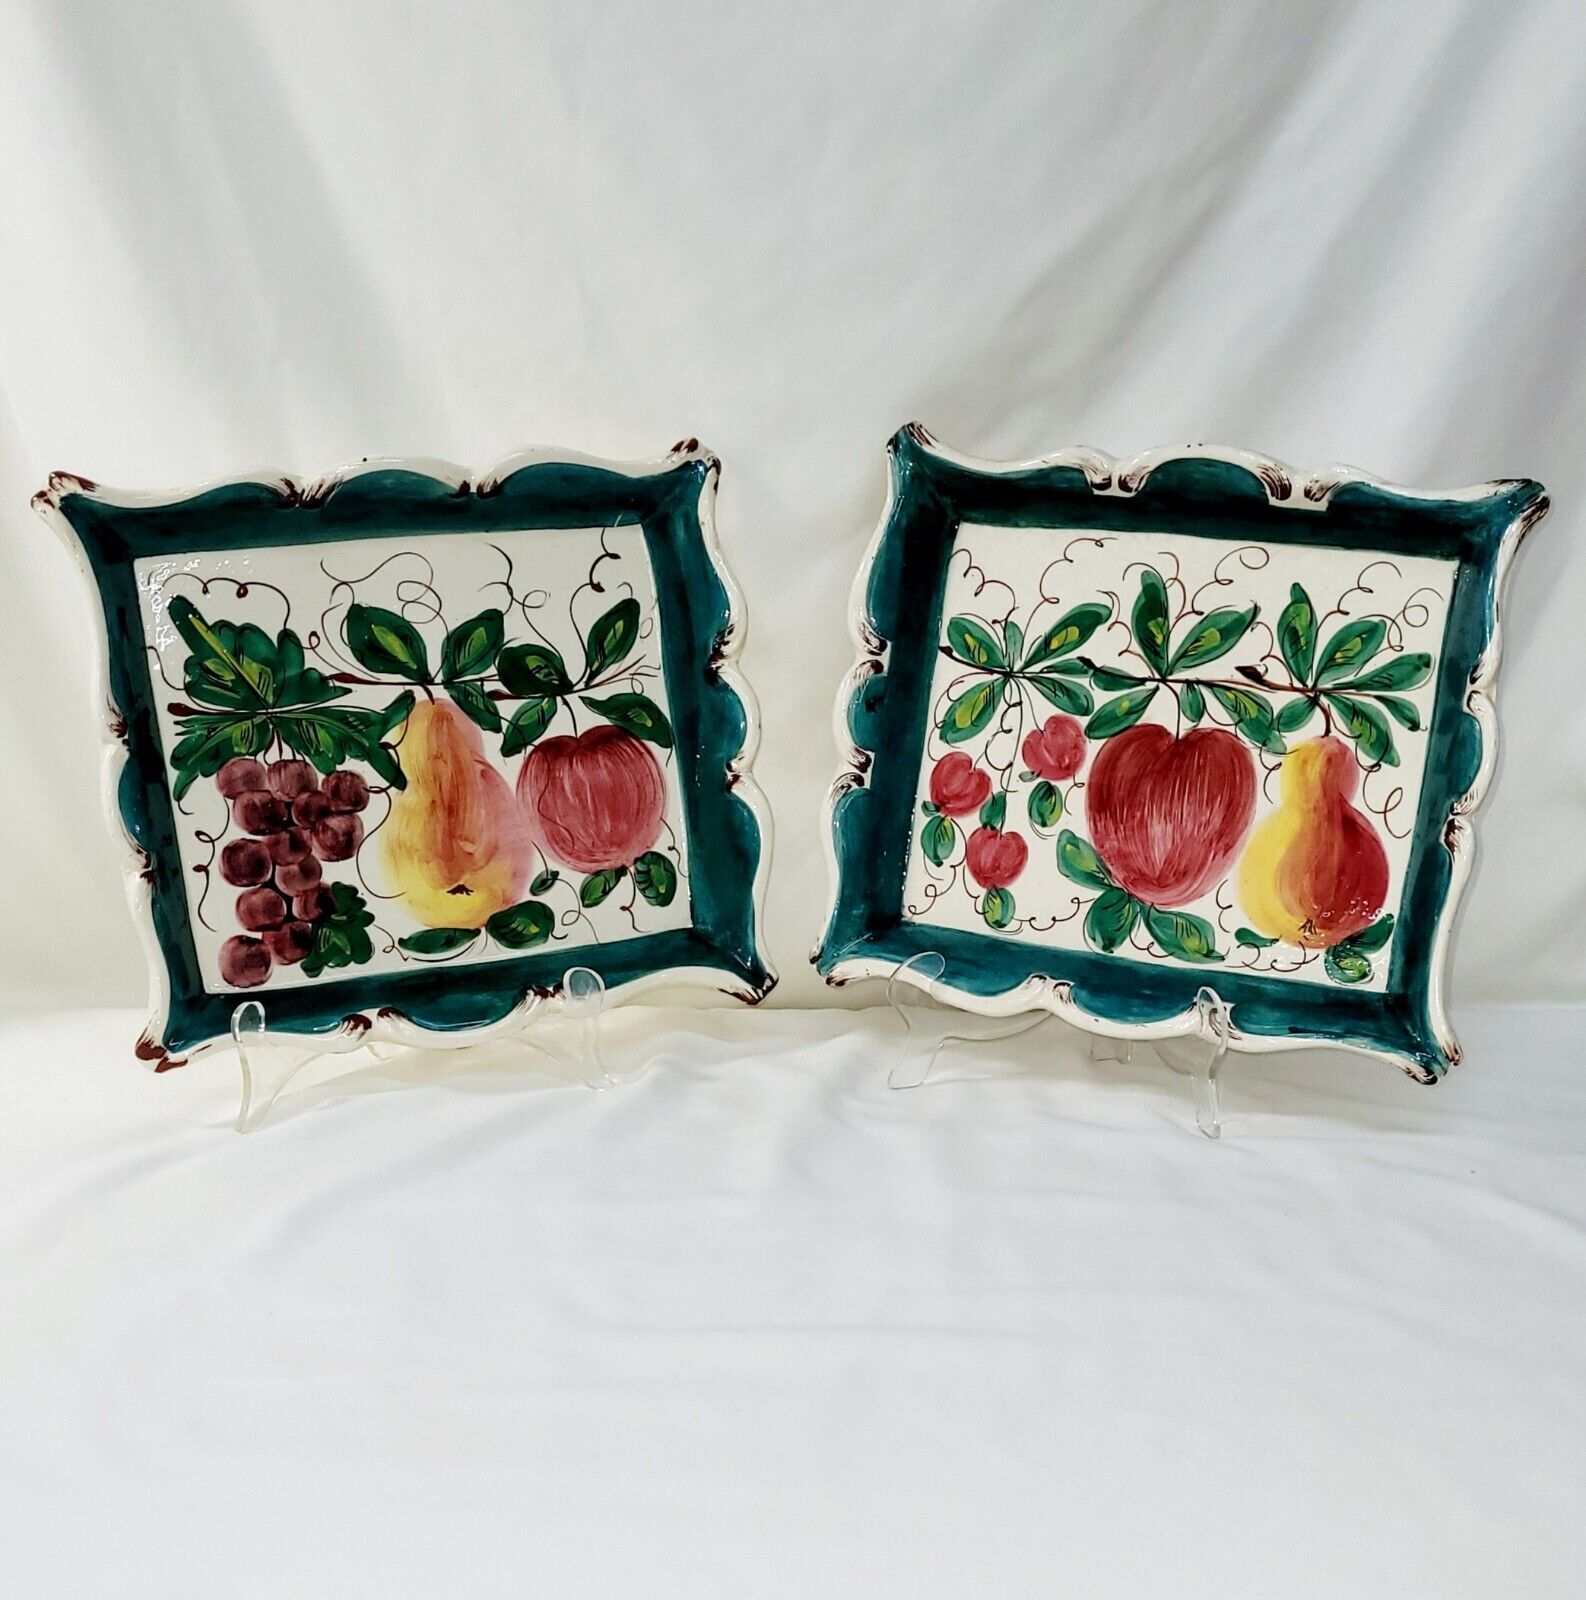 Set Of 2 Signed WCG Italy Ceramic Hand Painted Wall Art Decor With Fruit Design 